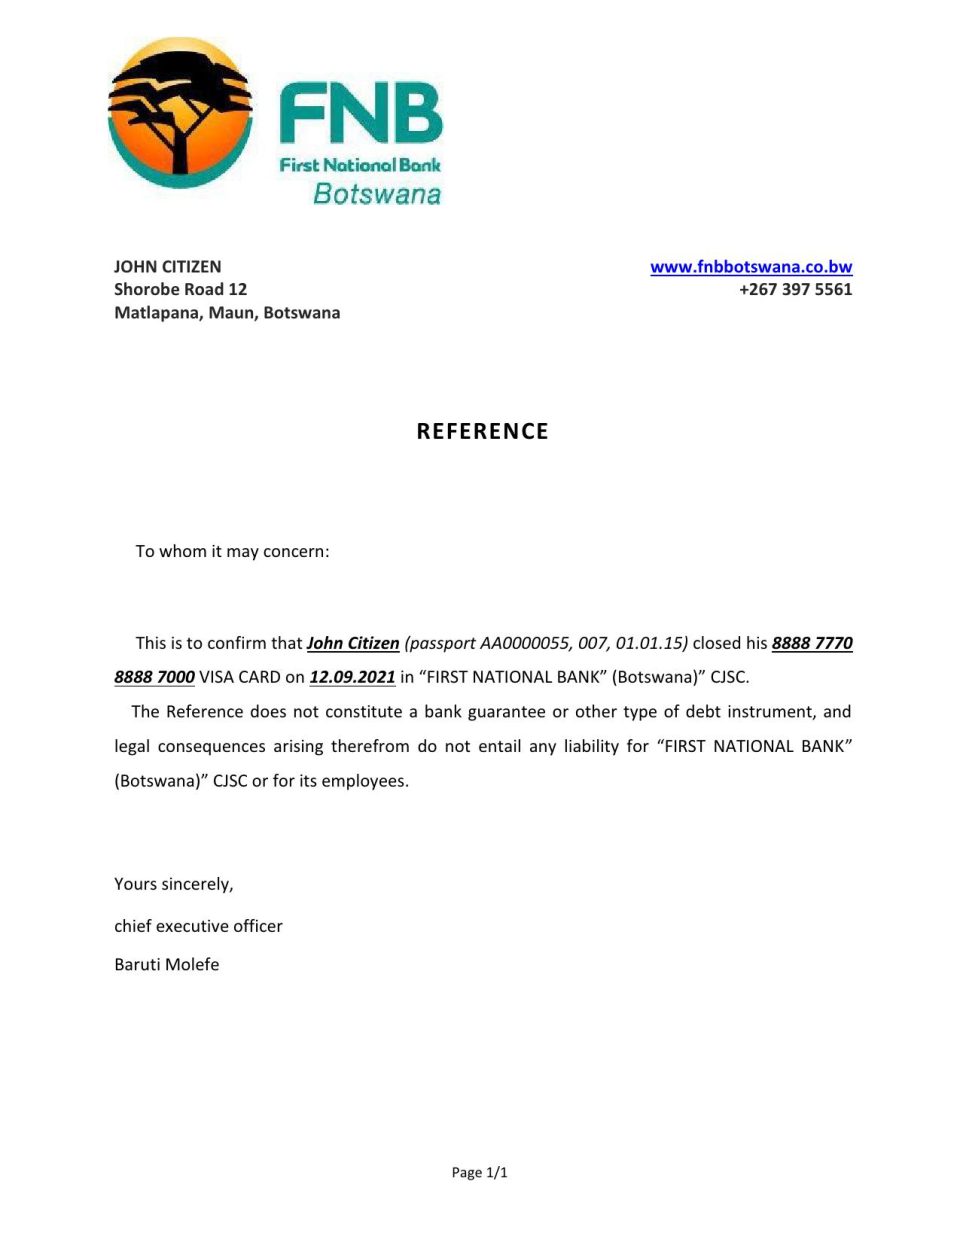 Download Botswana First National Bank (FNB) Bank Reference Letter Templates | Editable Word